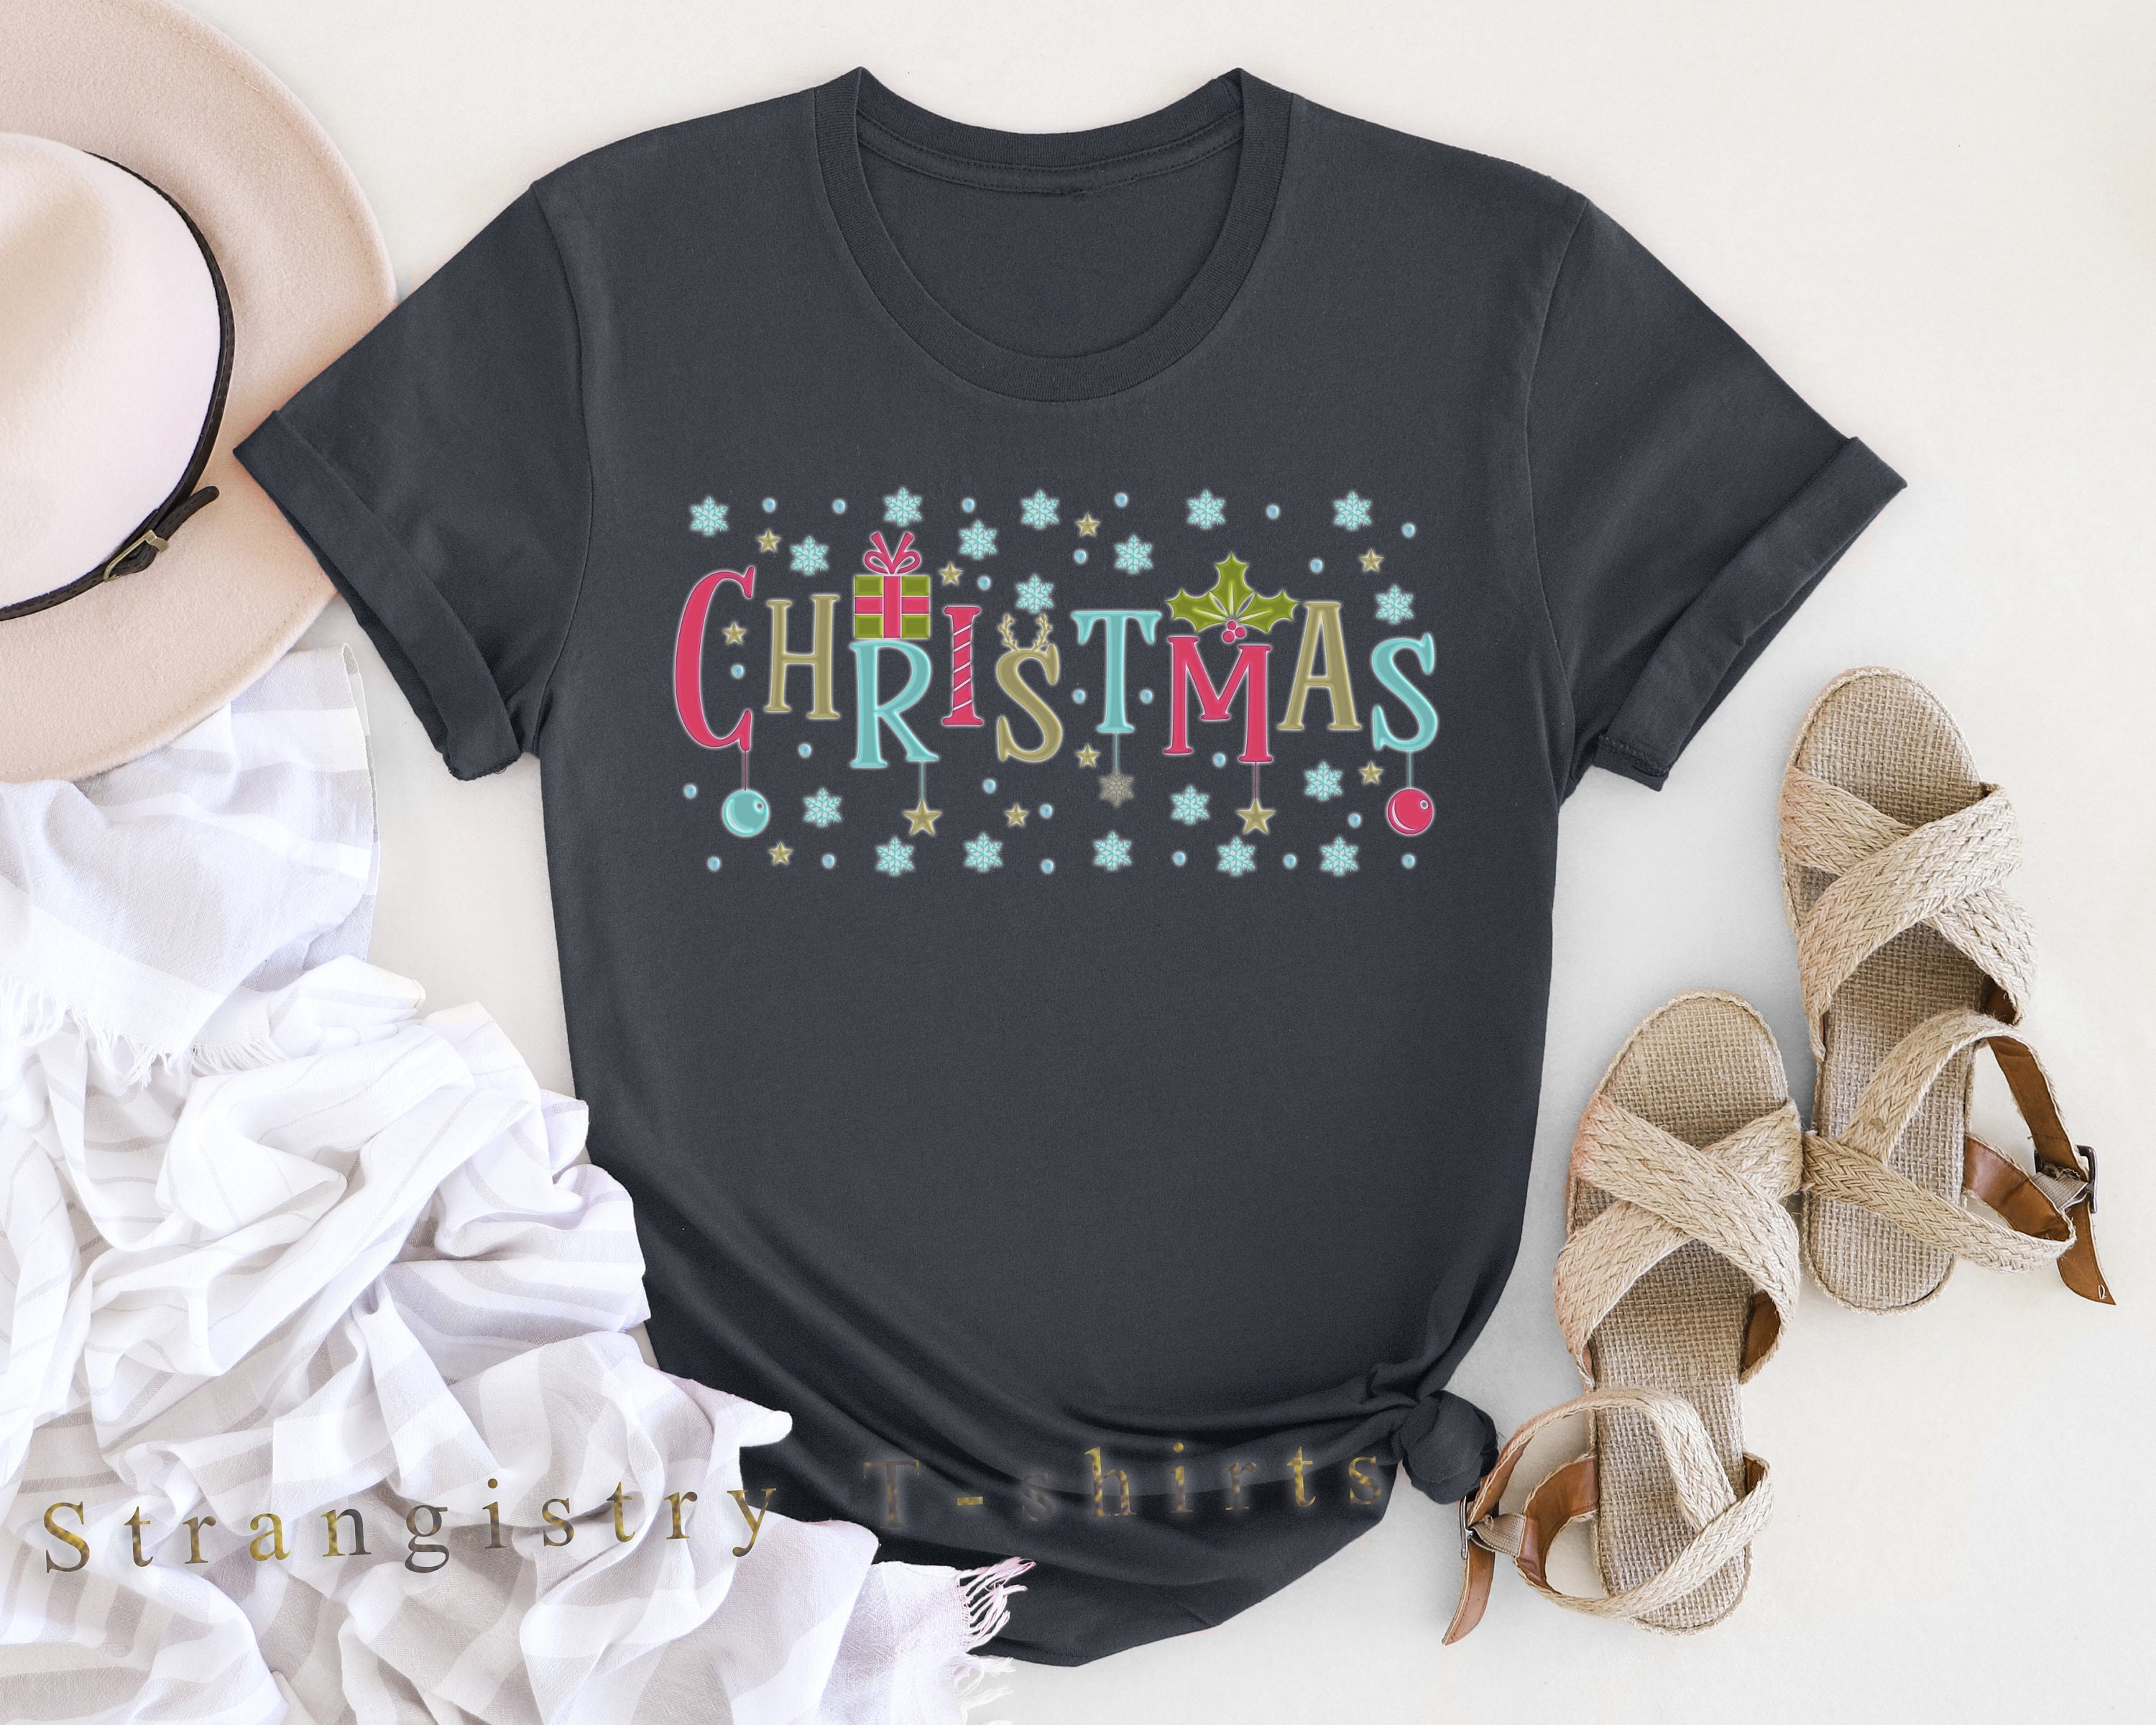 Christmas T-shirt with the Text of Christmas, Christian T-shirt for Christmas, Christmas Gift for Family, Friends and Loved Ones.